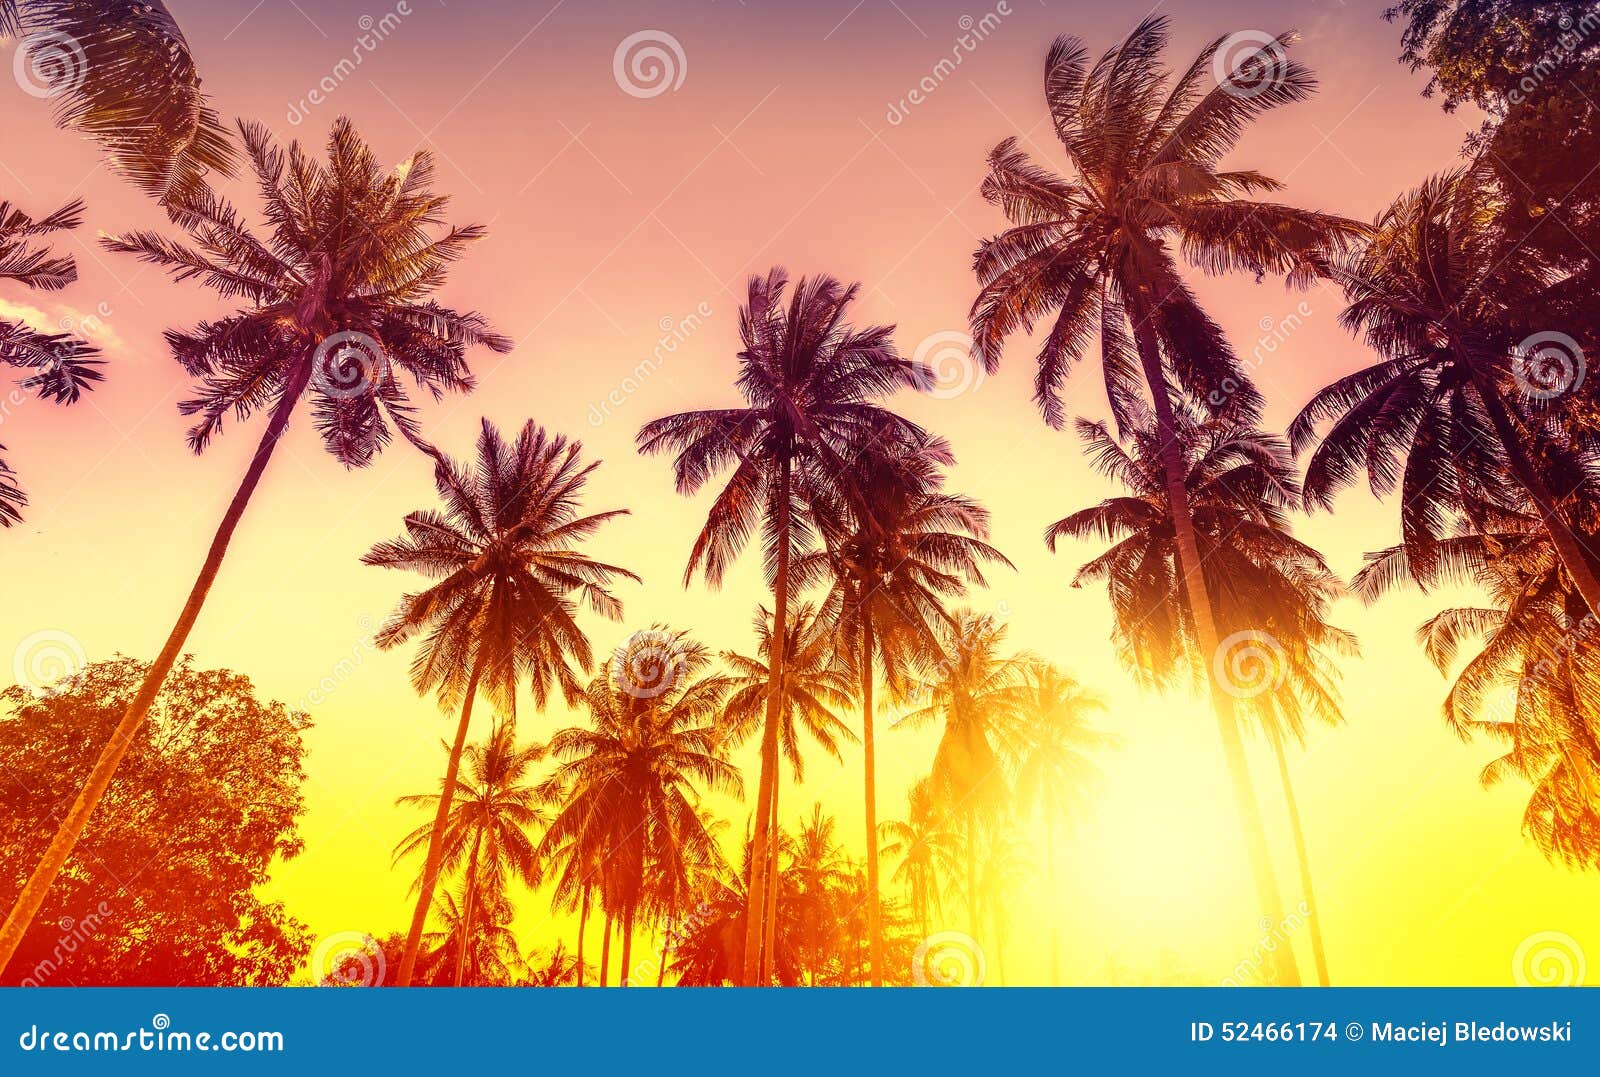 golden sunset, nature background with palms